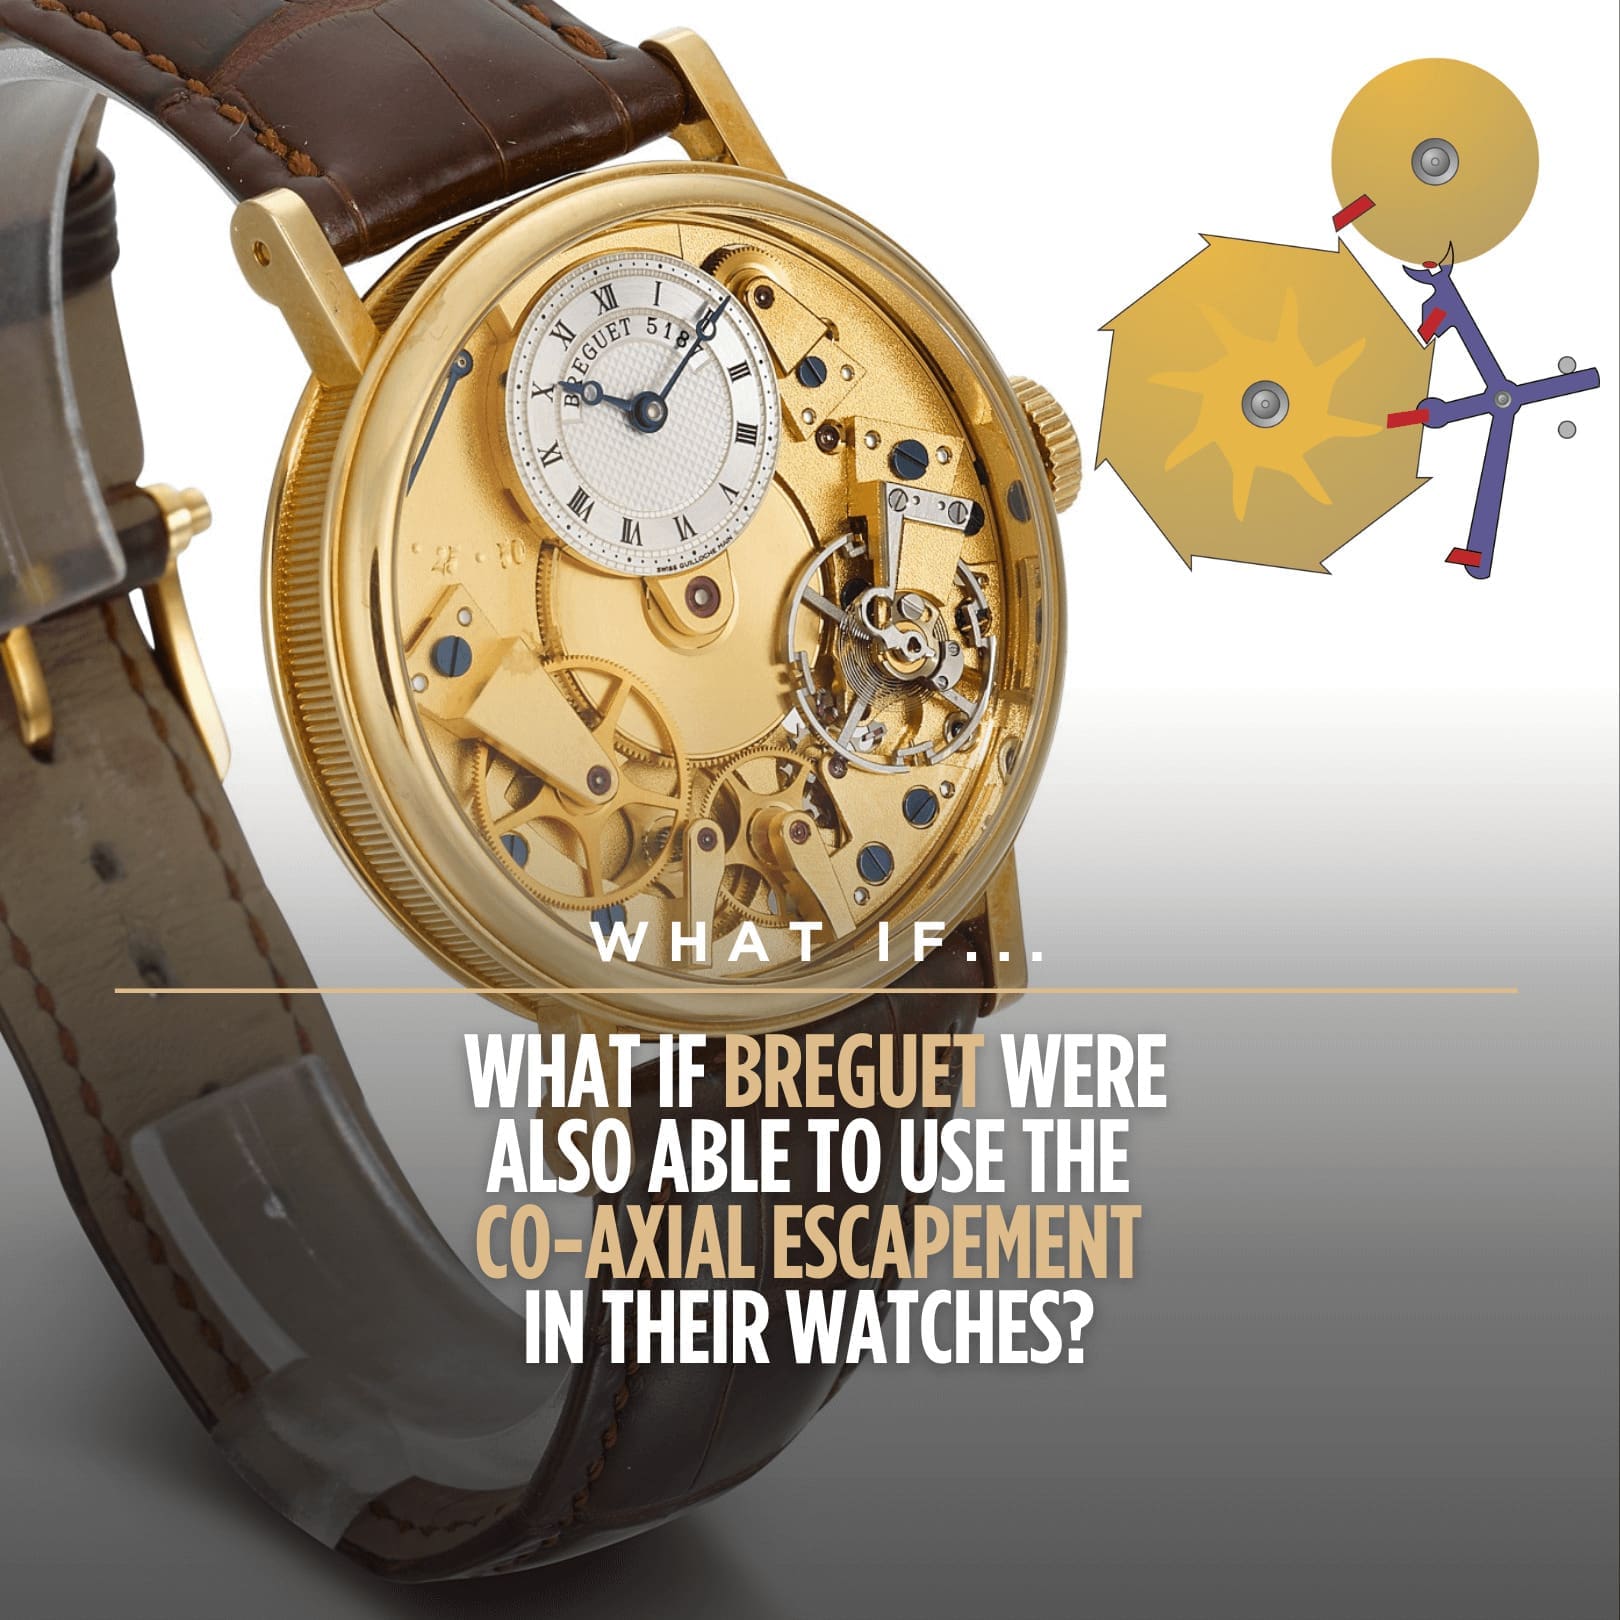 WHAT IF… Breguet were also able to use the co-axial escapement?